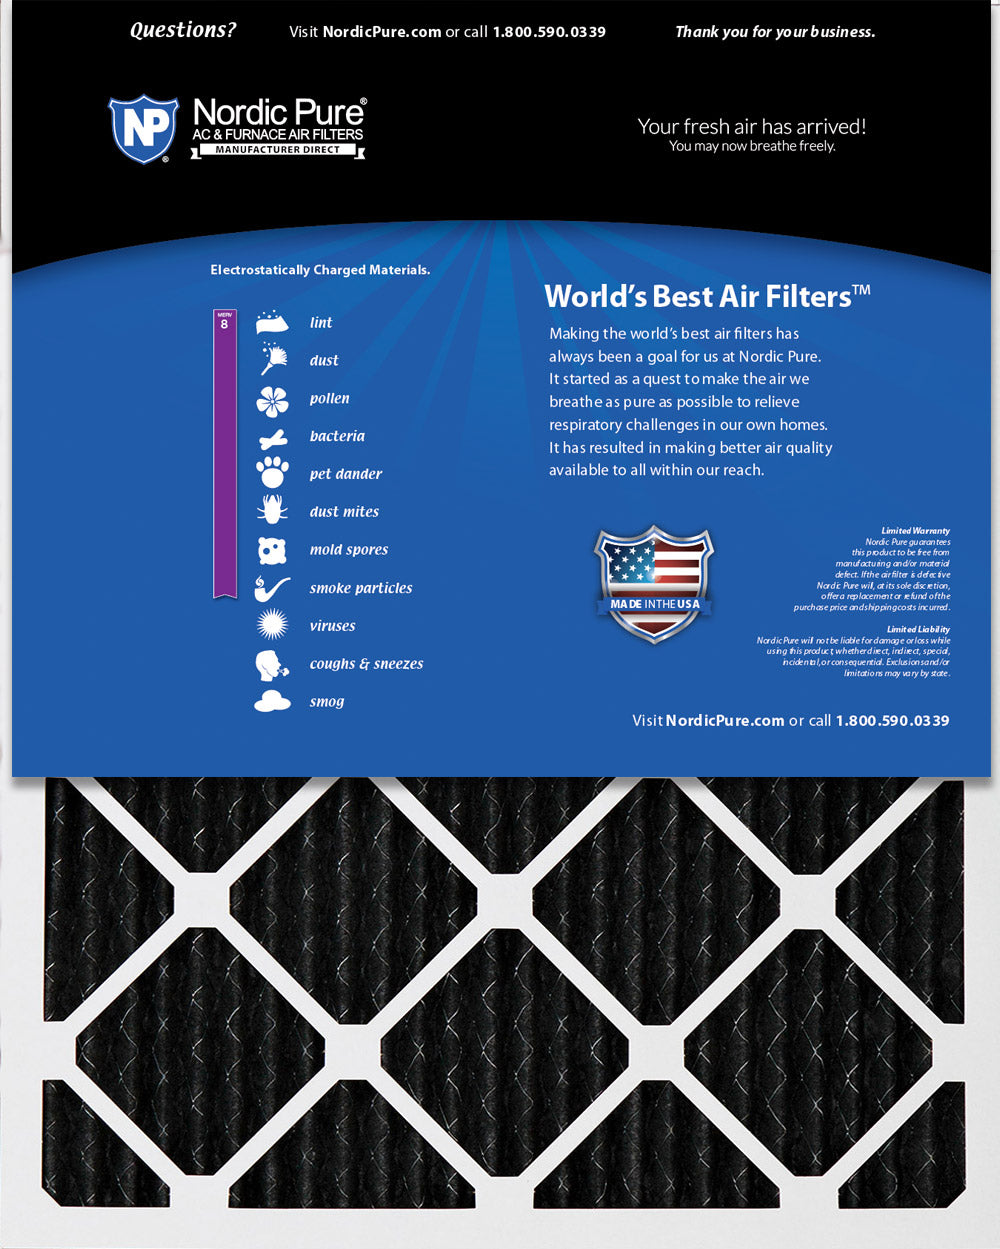 10x30x1 Pure Carbon Pleated Odor Reduction Furnace Air Filters